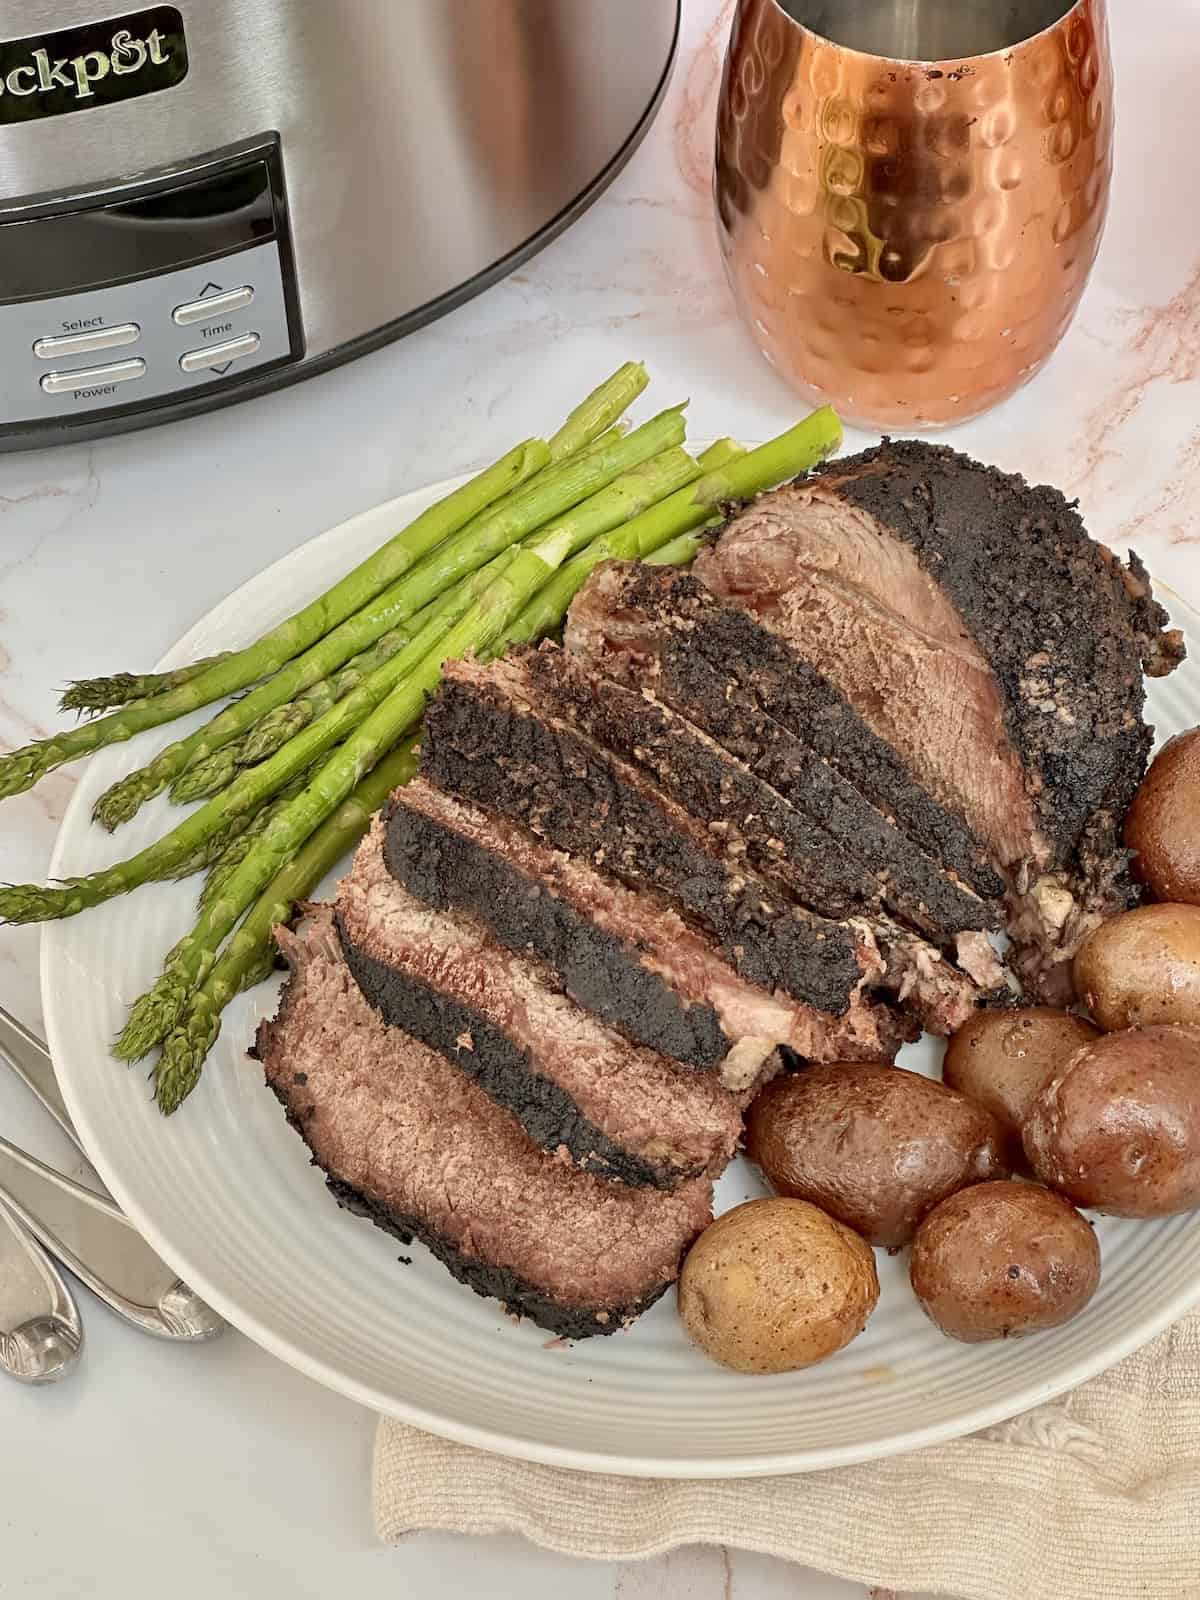 slow cooked tri tip roast sliced with potatoes and asparagus in a white plate